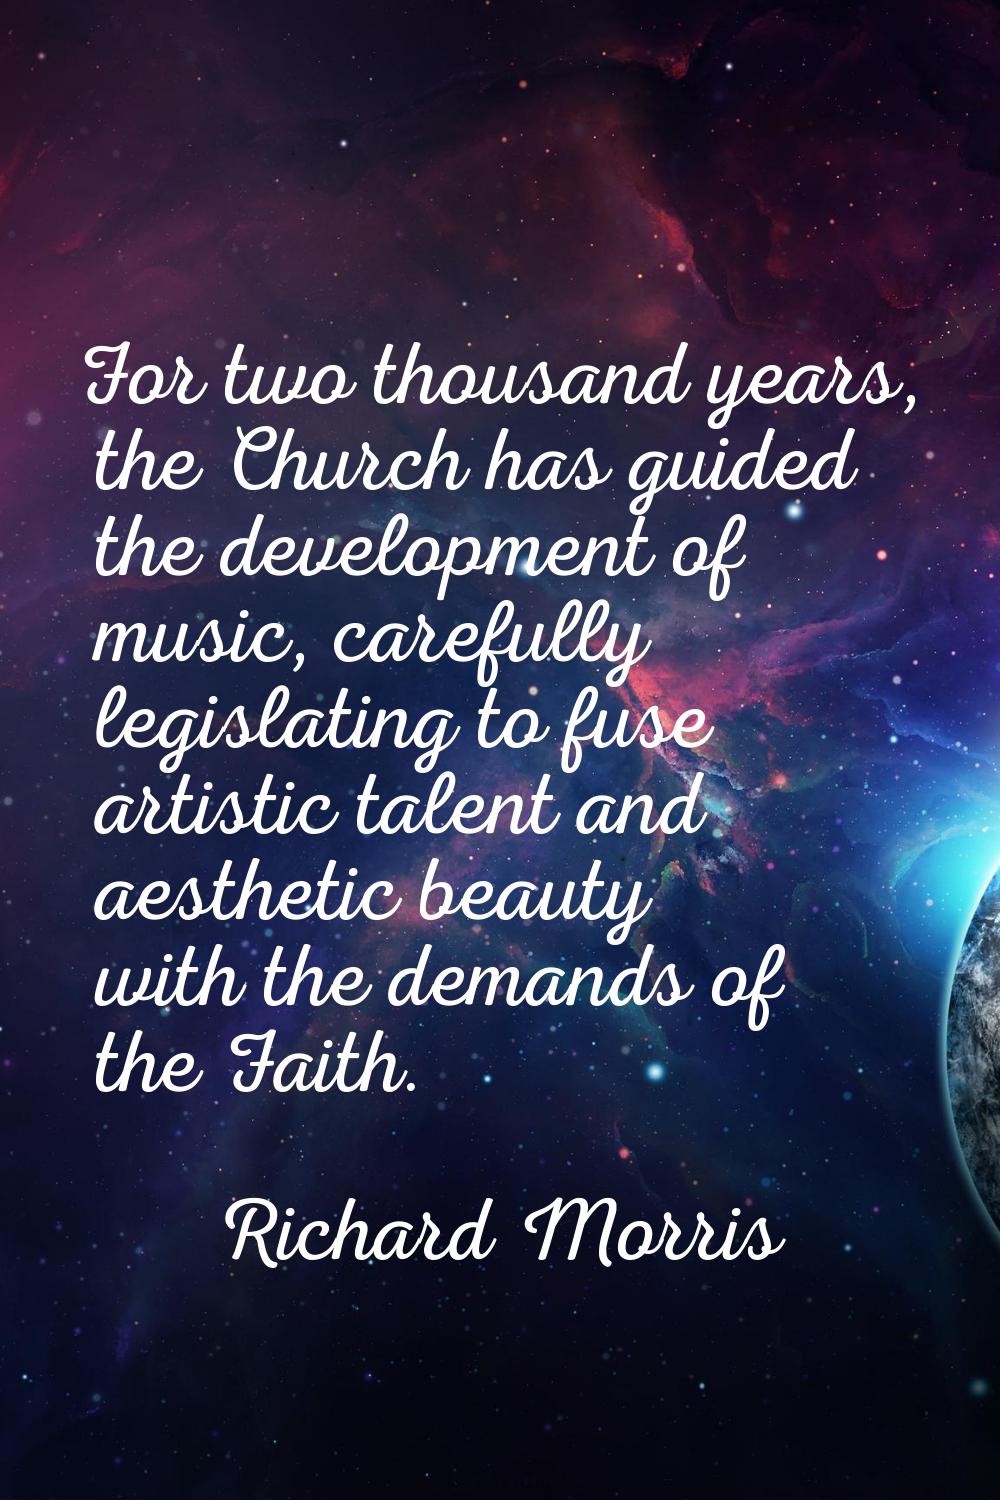 For two thousand years, the Church has guided the development of music, carefully legislating to fu